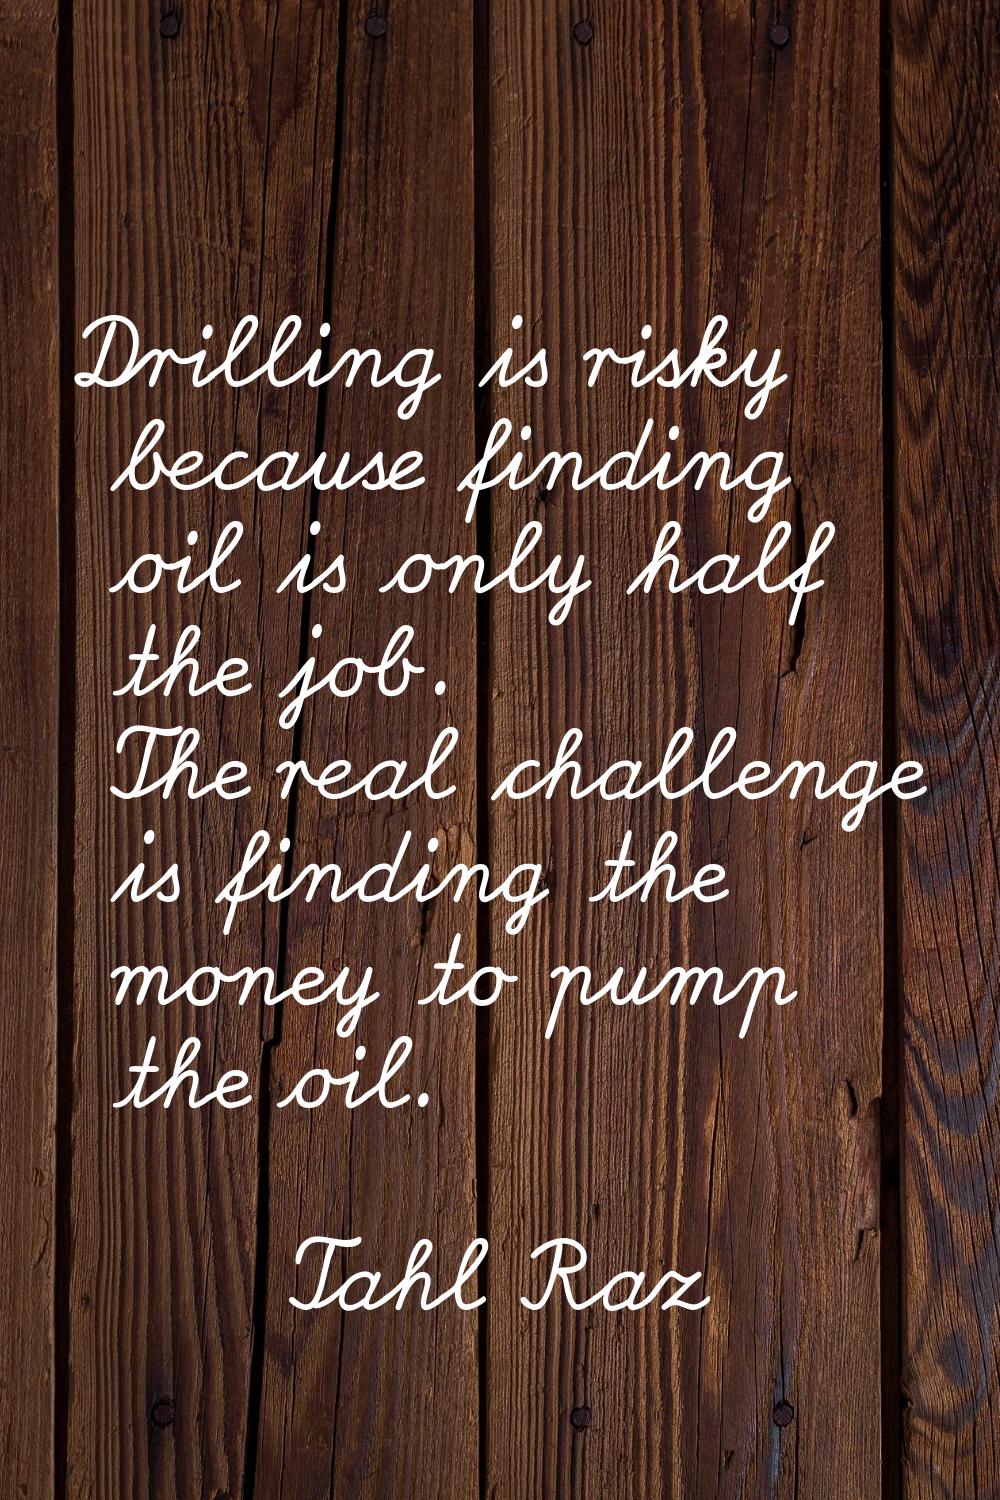 Drilling is risky because finding oil is only half the job. The real challenge is finding the money